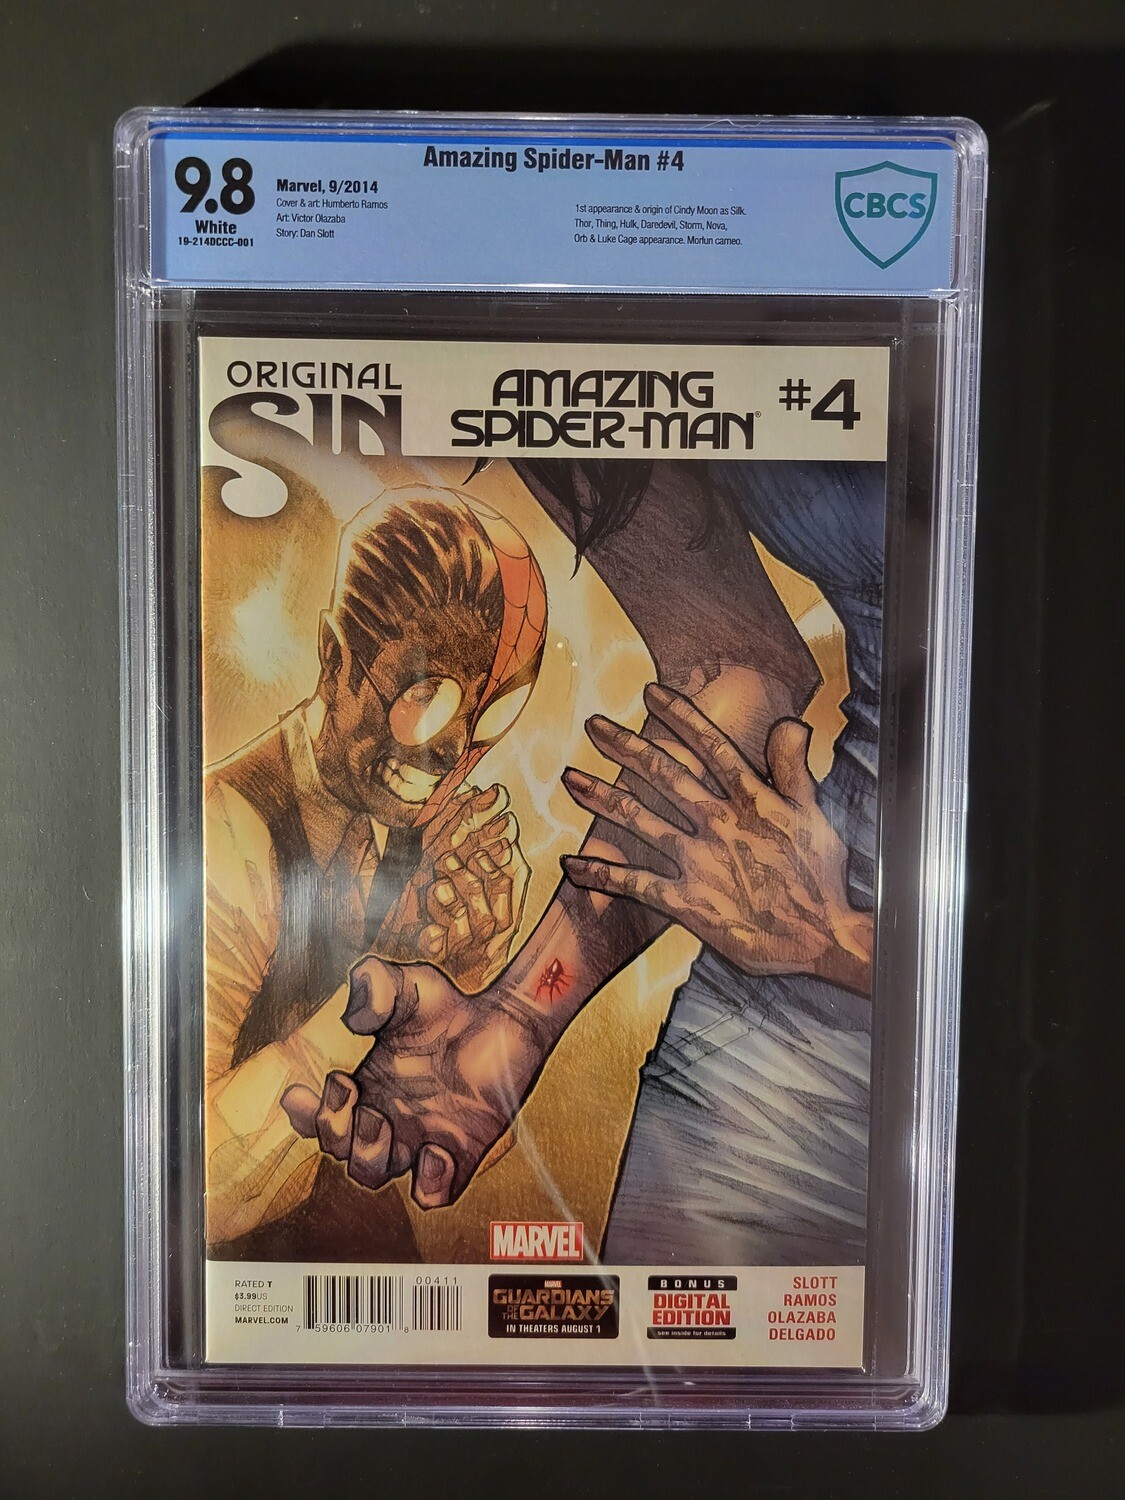 Amazing Spider-Man #4 CBCS 9.8 1st appearance of Silk